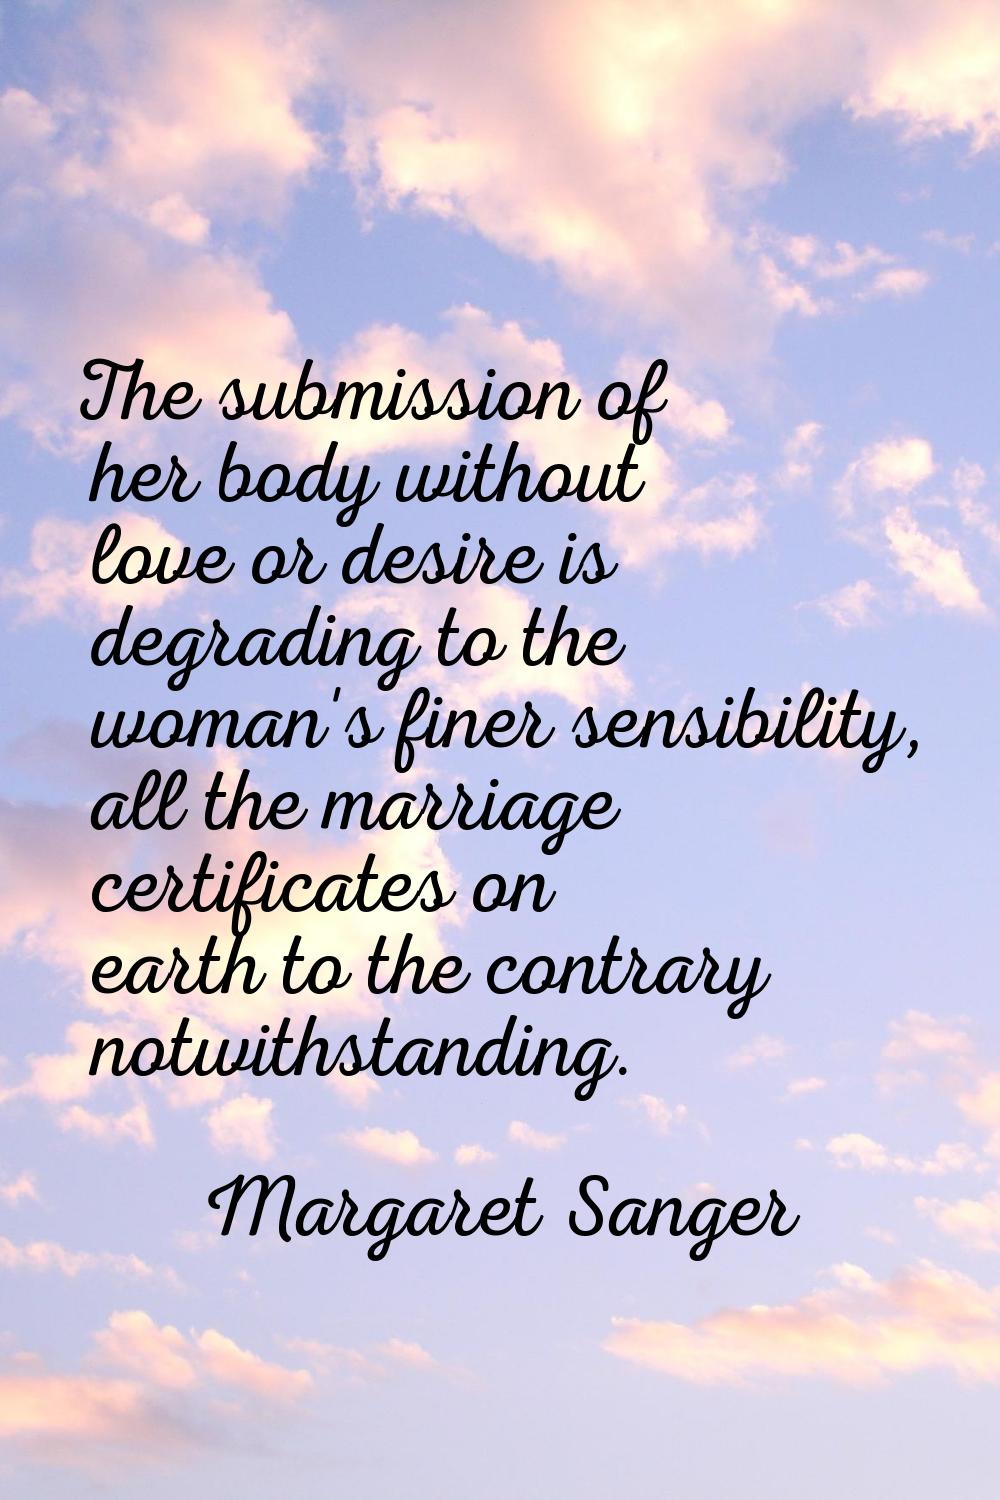 The submission of her body without love or desire is degrading to the woman's finer sensibility, al